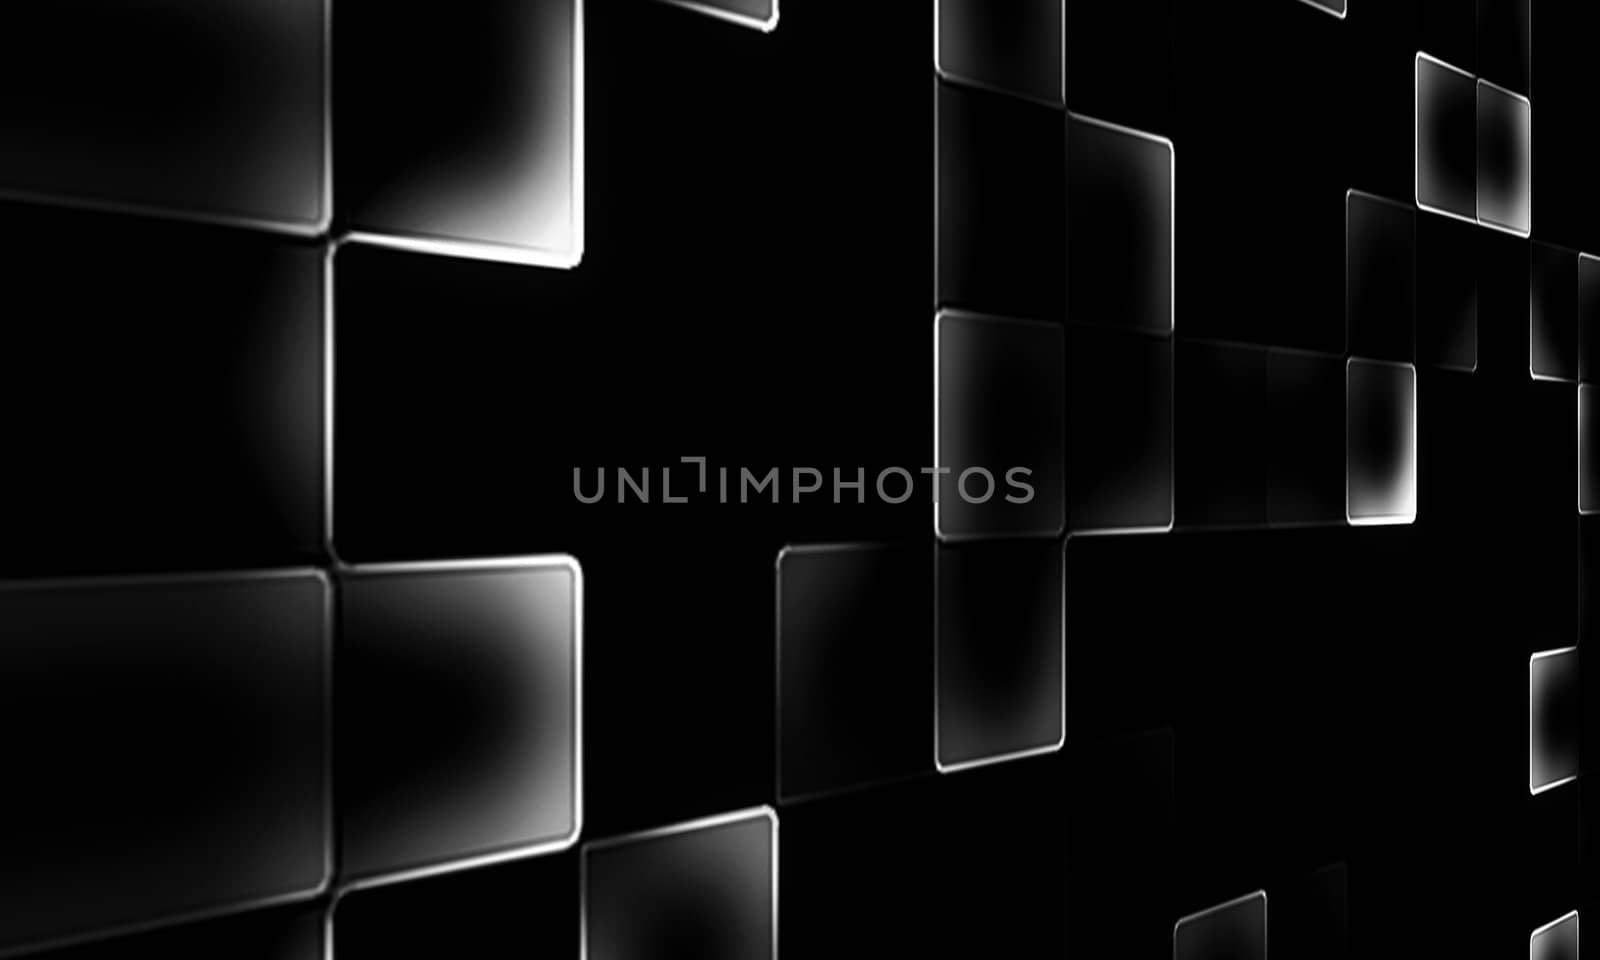 Abstract background of squares